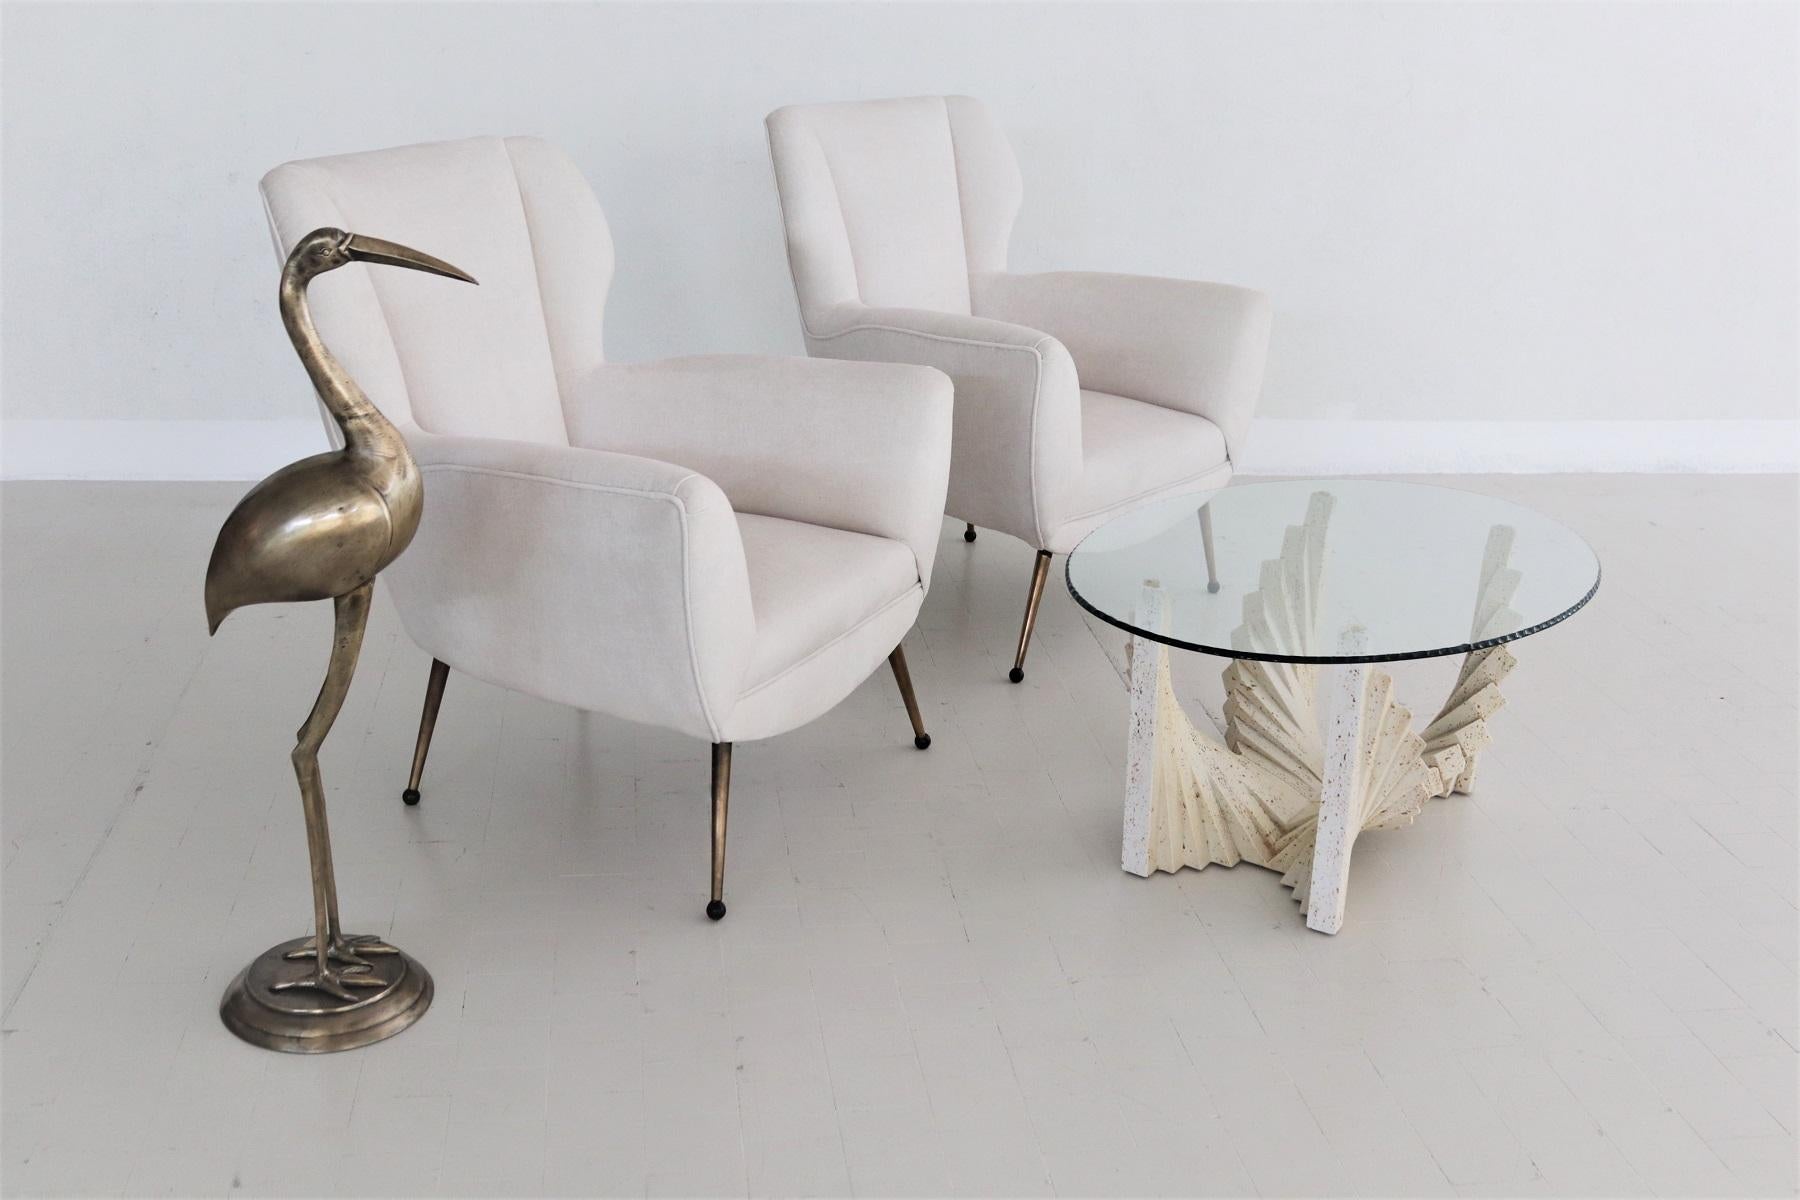 Magnificent pair of original Italian armchairs reupholstered in off-white velvet with metal feet and Bakelite tips.
Made in Italy in the 1950s in the style of Gigi Radice, 1950s.
Completely refurbished with quality material and re-upholstered with